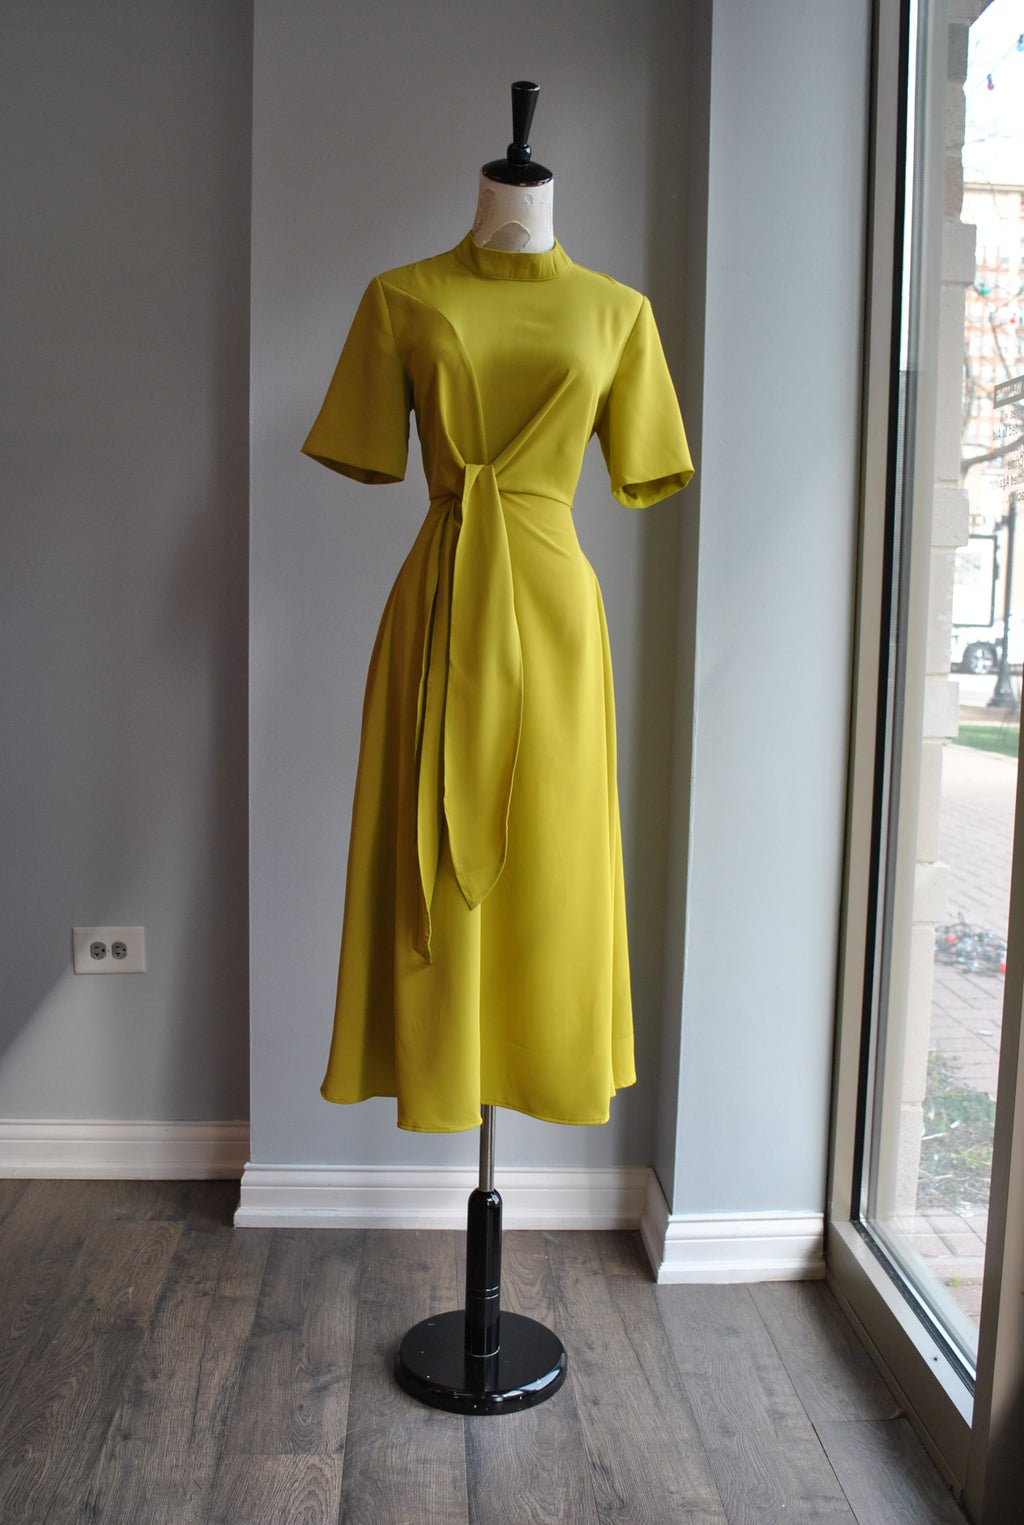 MUSTARD MIDI DRESS WITH FRONT TIE